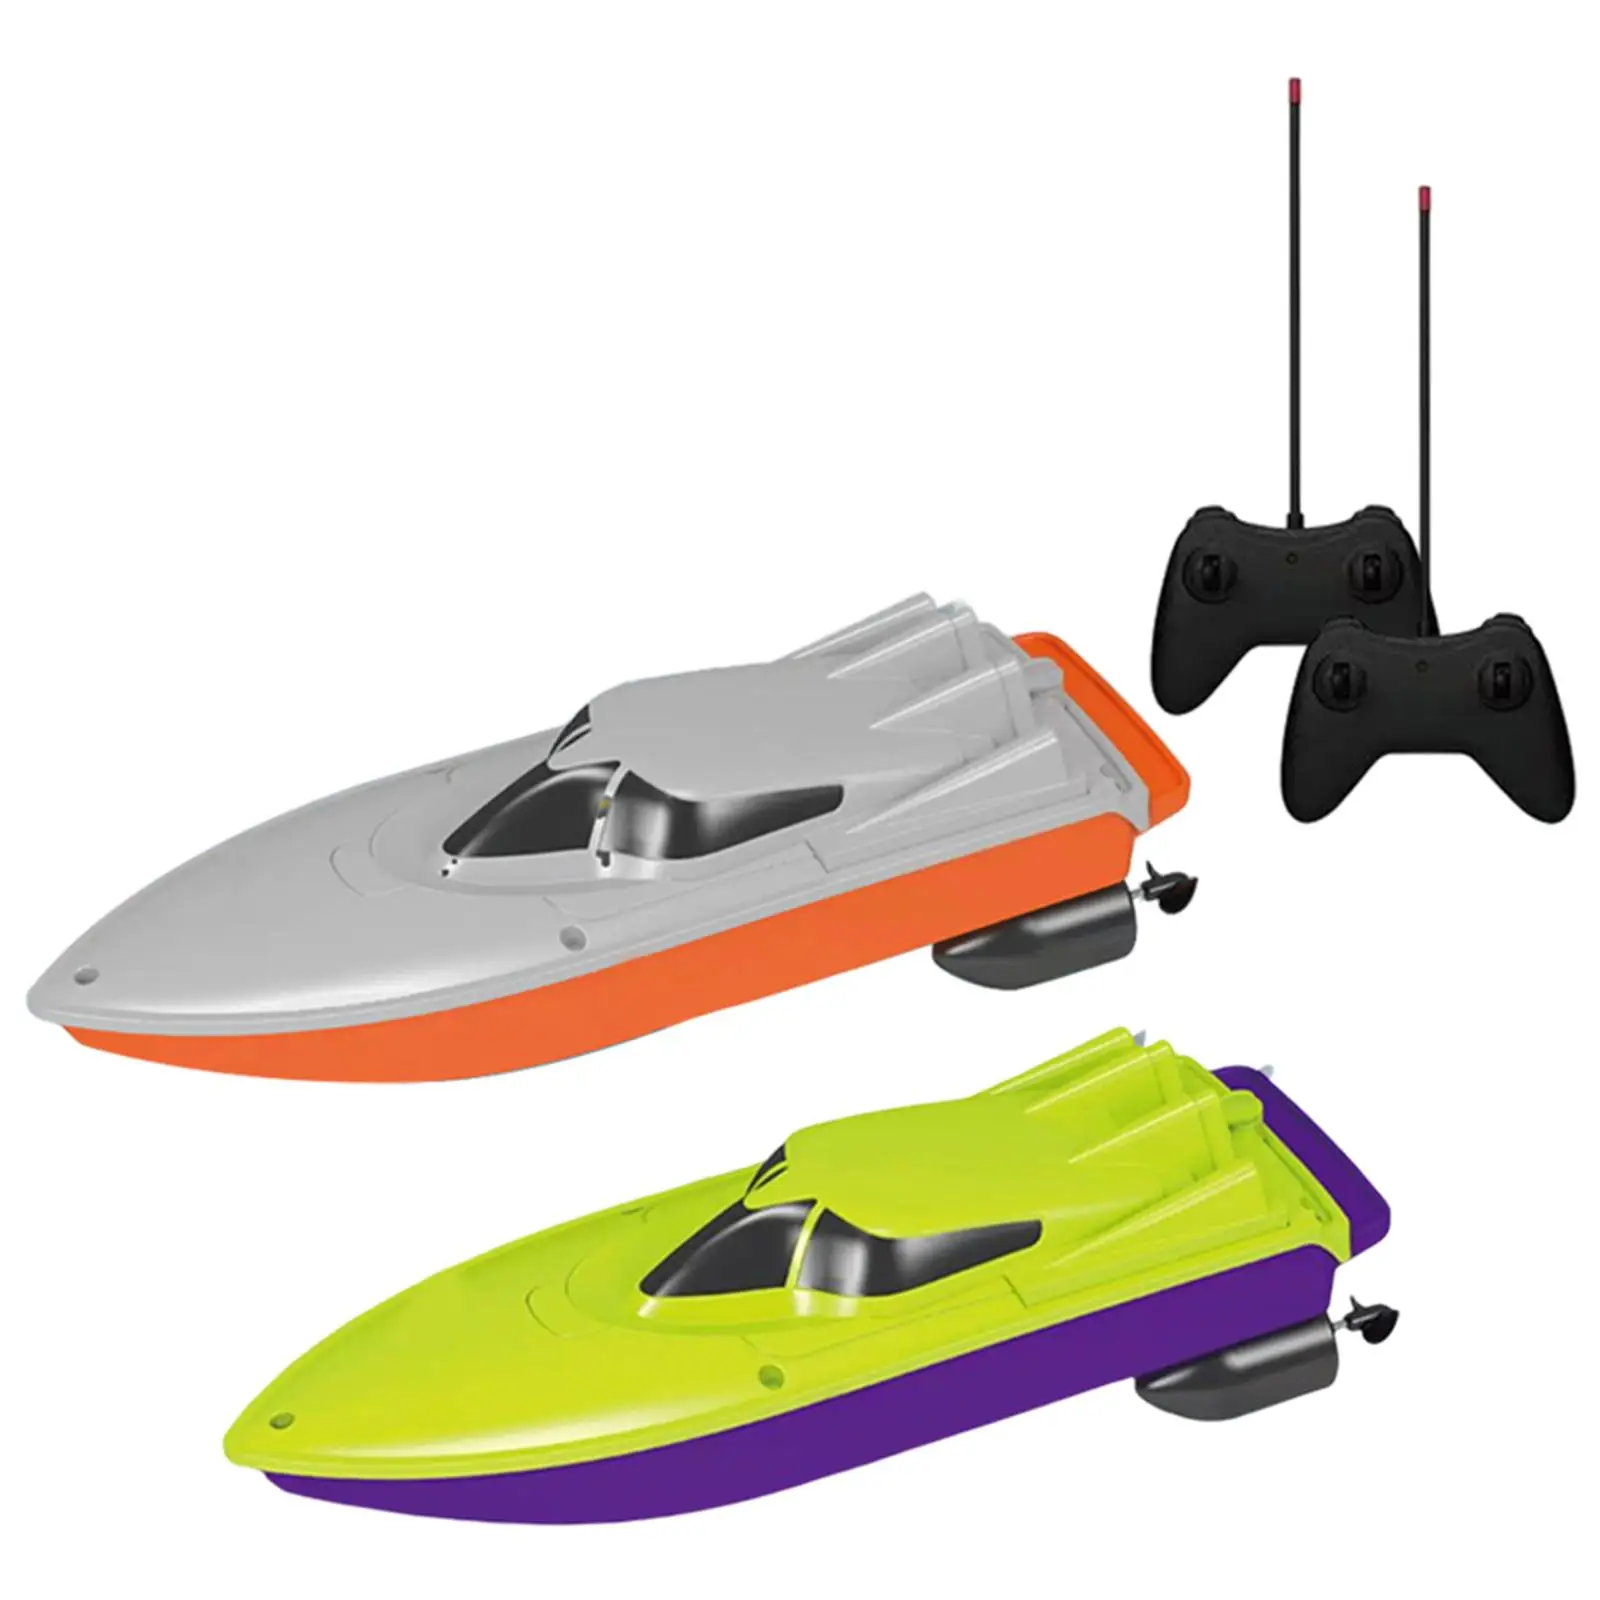 2.4G RC Boat 10km/H Electric Ship Yacht Toys High Speed Remote Control Boat for River, Kids and Adults, Outdoor Sports Toy,